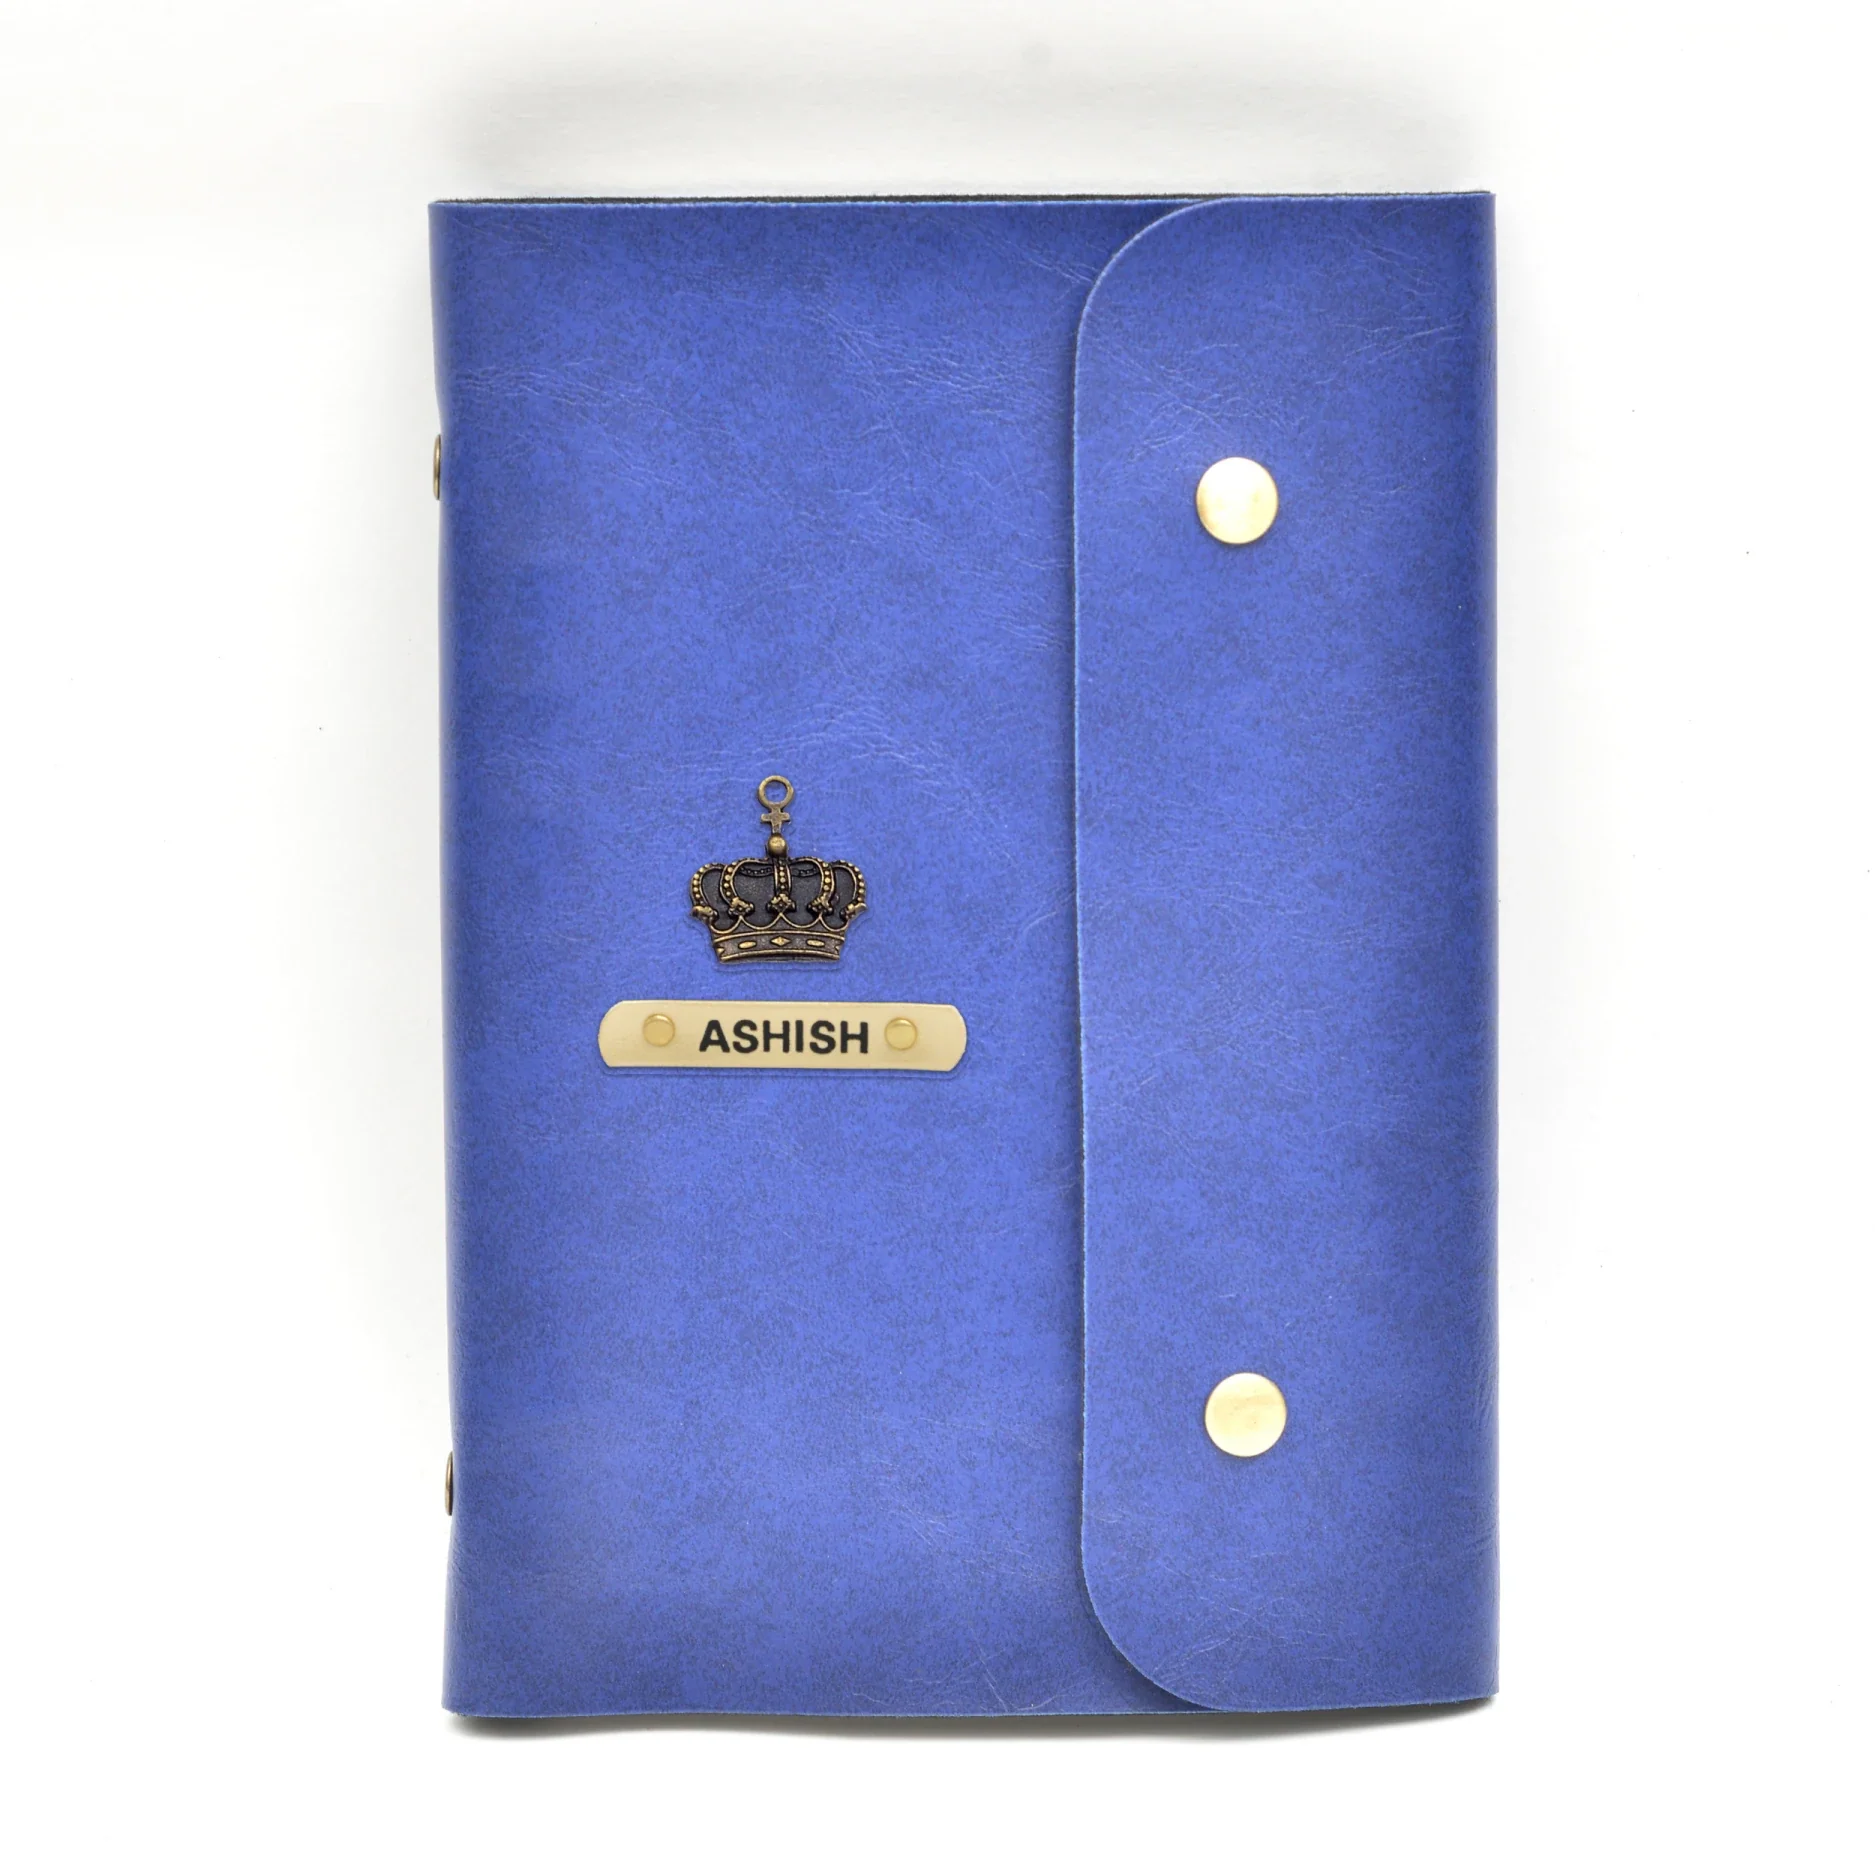 Impress your colleagues and clients with our personalized leather buttoned diary. With a range of designs to choose from, you can find the one that reflects your professional brand.